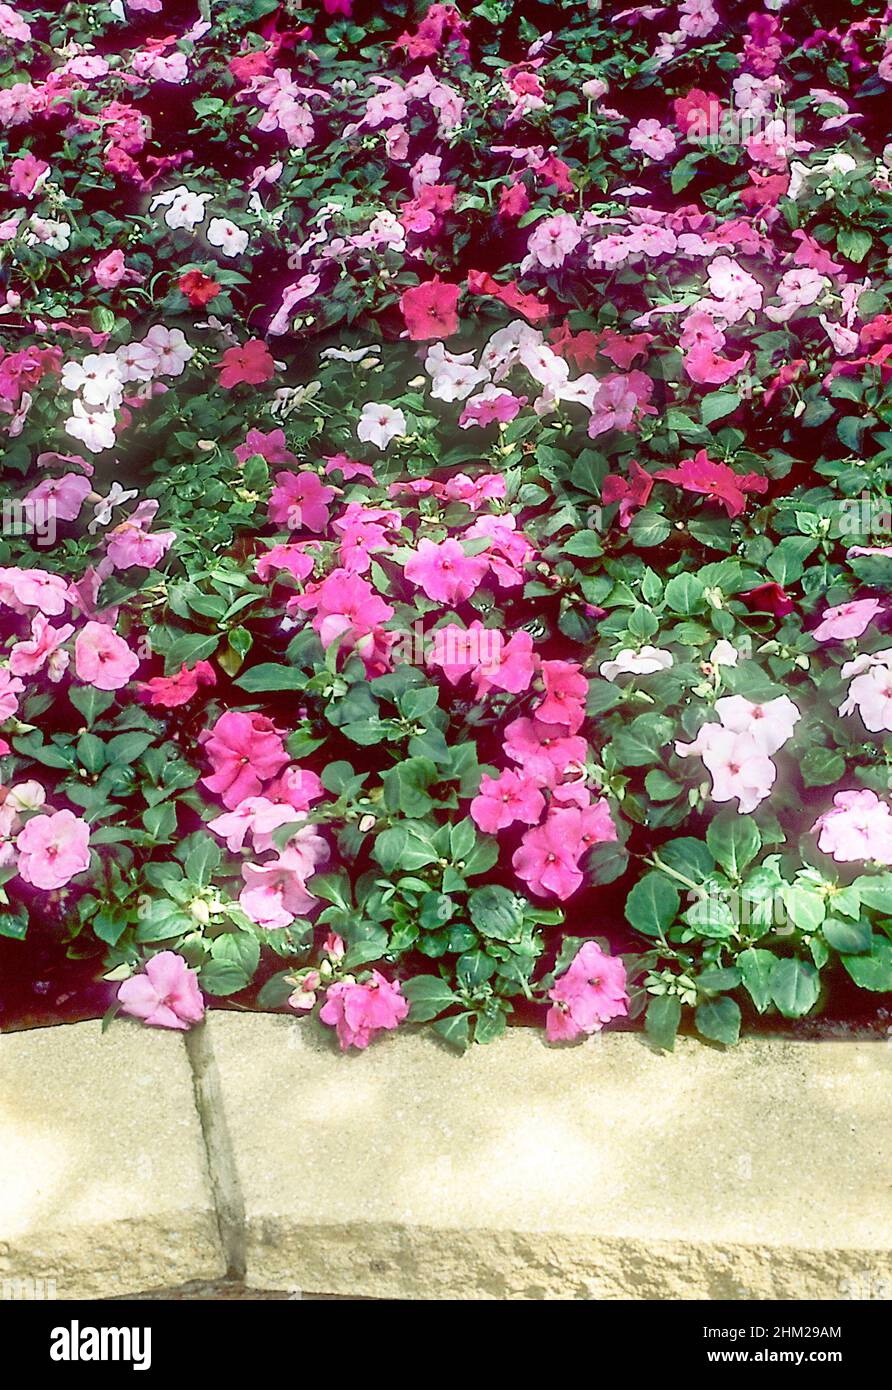 Impatiens Busy Lizzie F1 Accent Mystic in mixed colours of red pink purple  and white growing in a raised flower bed in summer Stock Photo